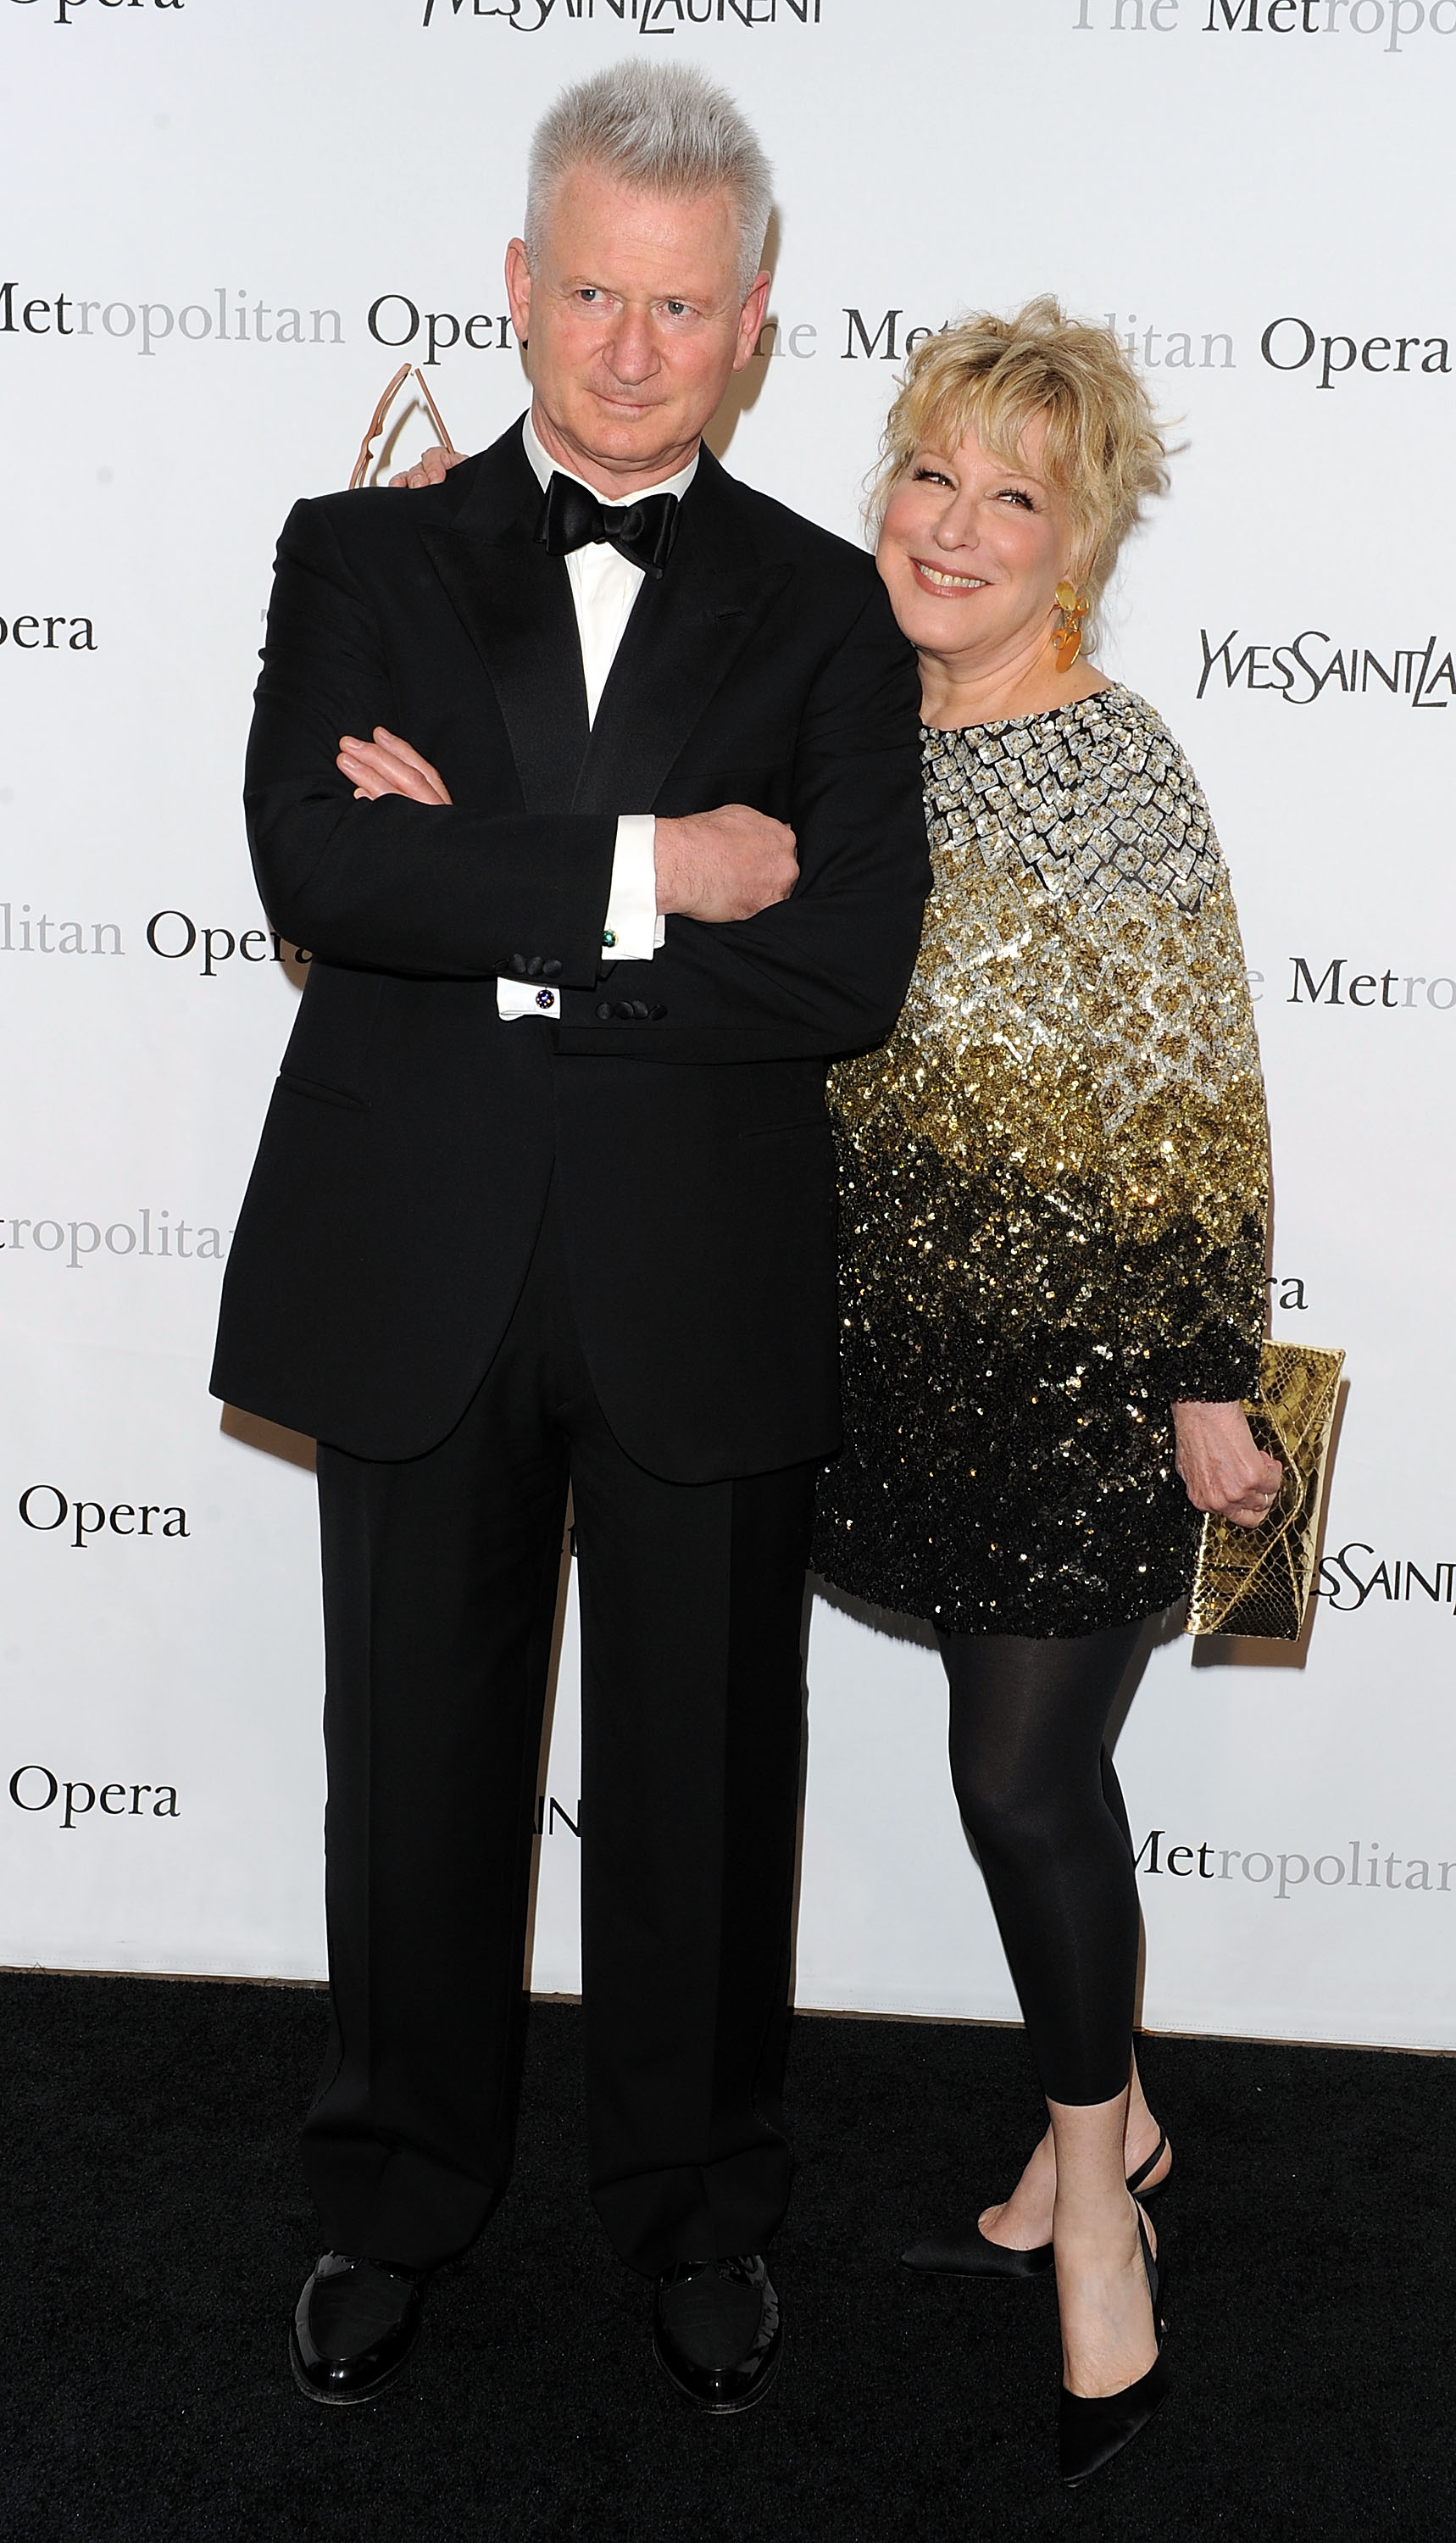 Bette Midler and Martin von Haselberg at The Metropolitan Opera House on April 12, 2010 in New York City. | Source: Getty Images